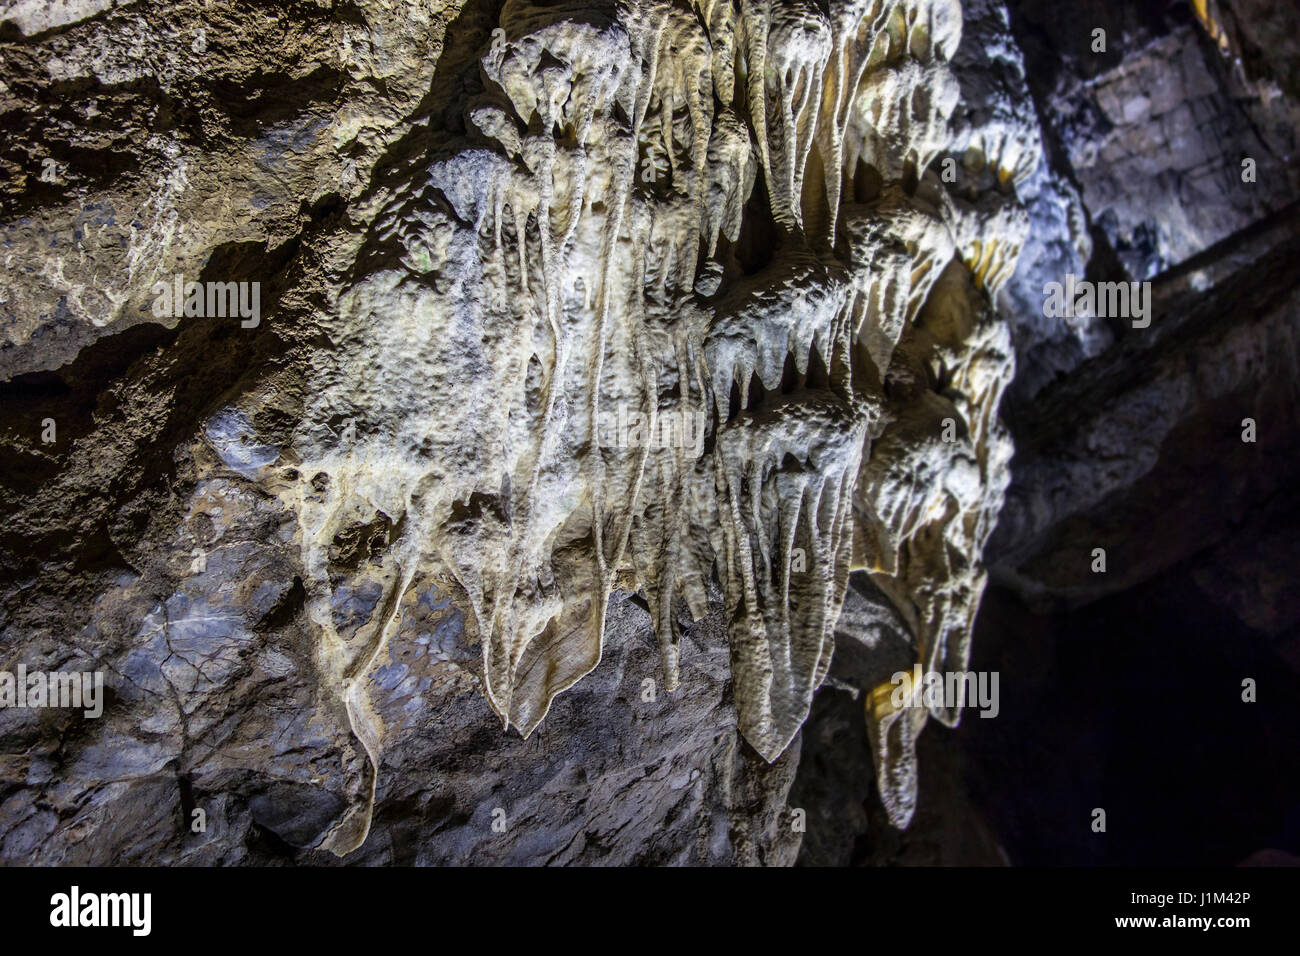 Flowstone / cave draperies, sheetlike deposits of calcite suspended from ceiling in the Caves of Han-sur-Lesse / Grottes de Han, Ardennes, Belgium Stock Photo